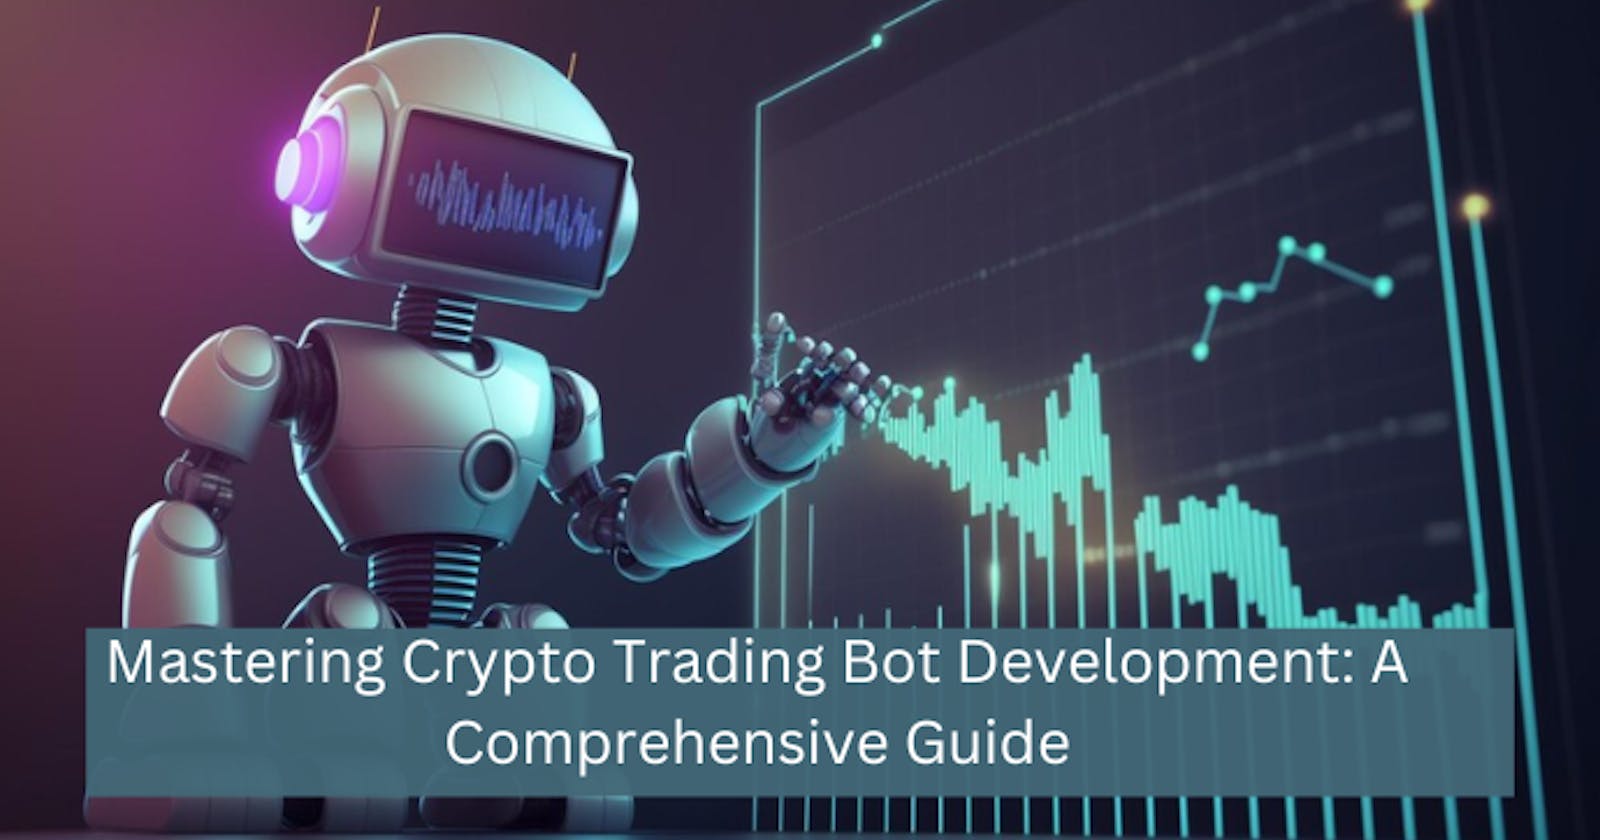 Mastering Crypto Trading Bot Development: A Comprehensive Guide